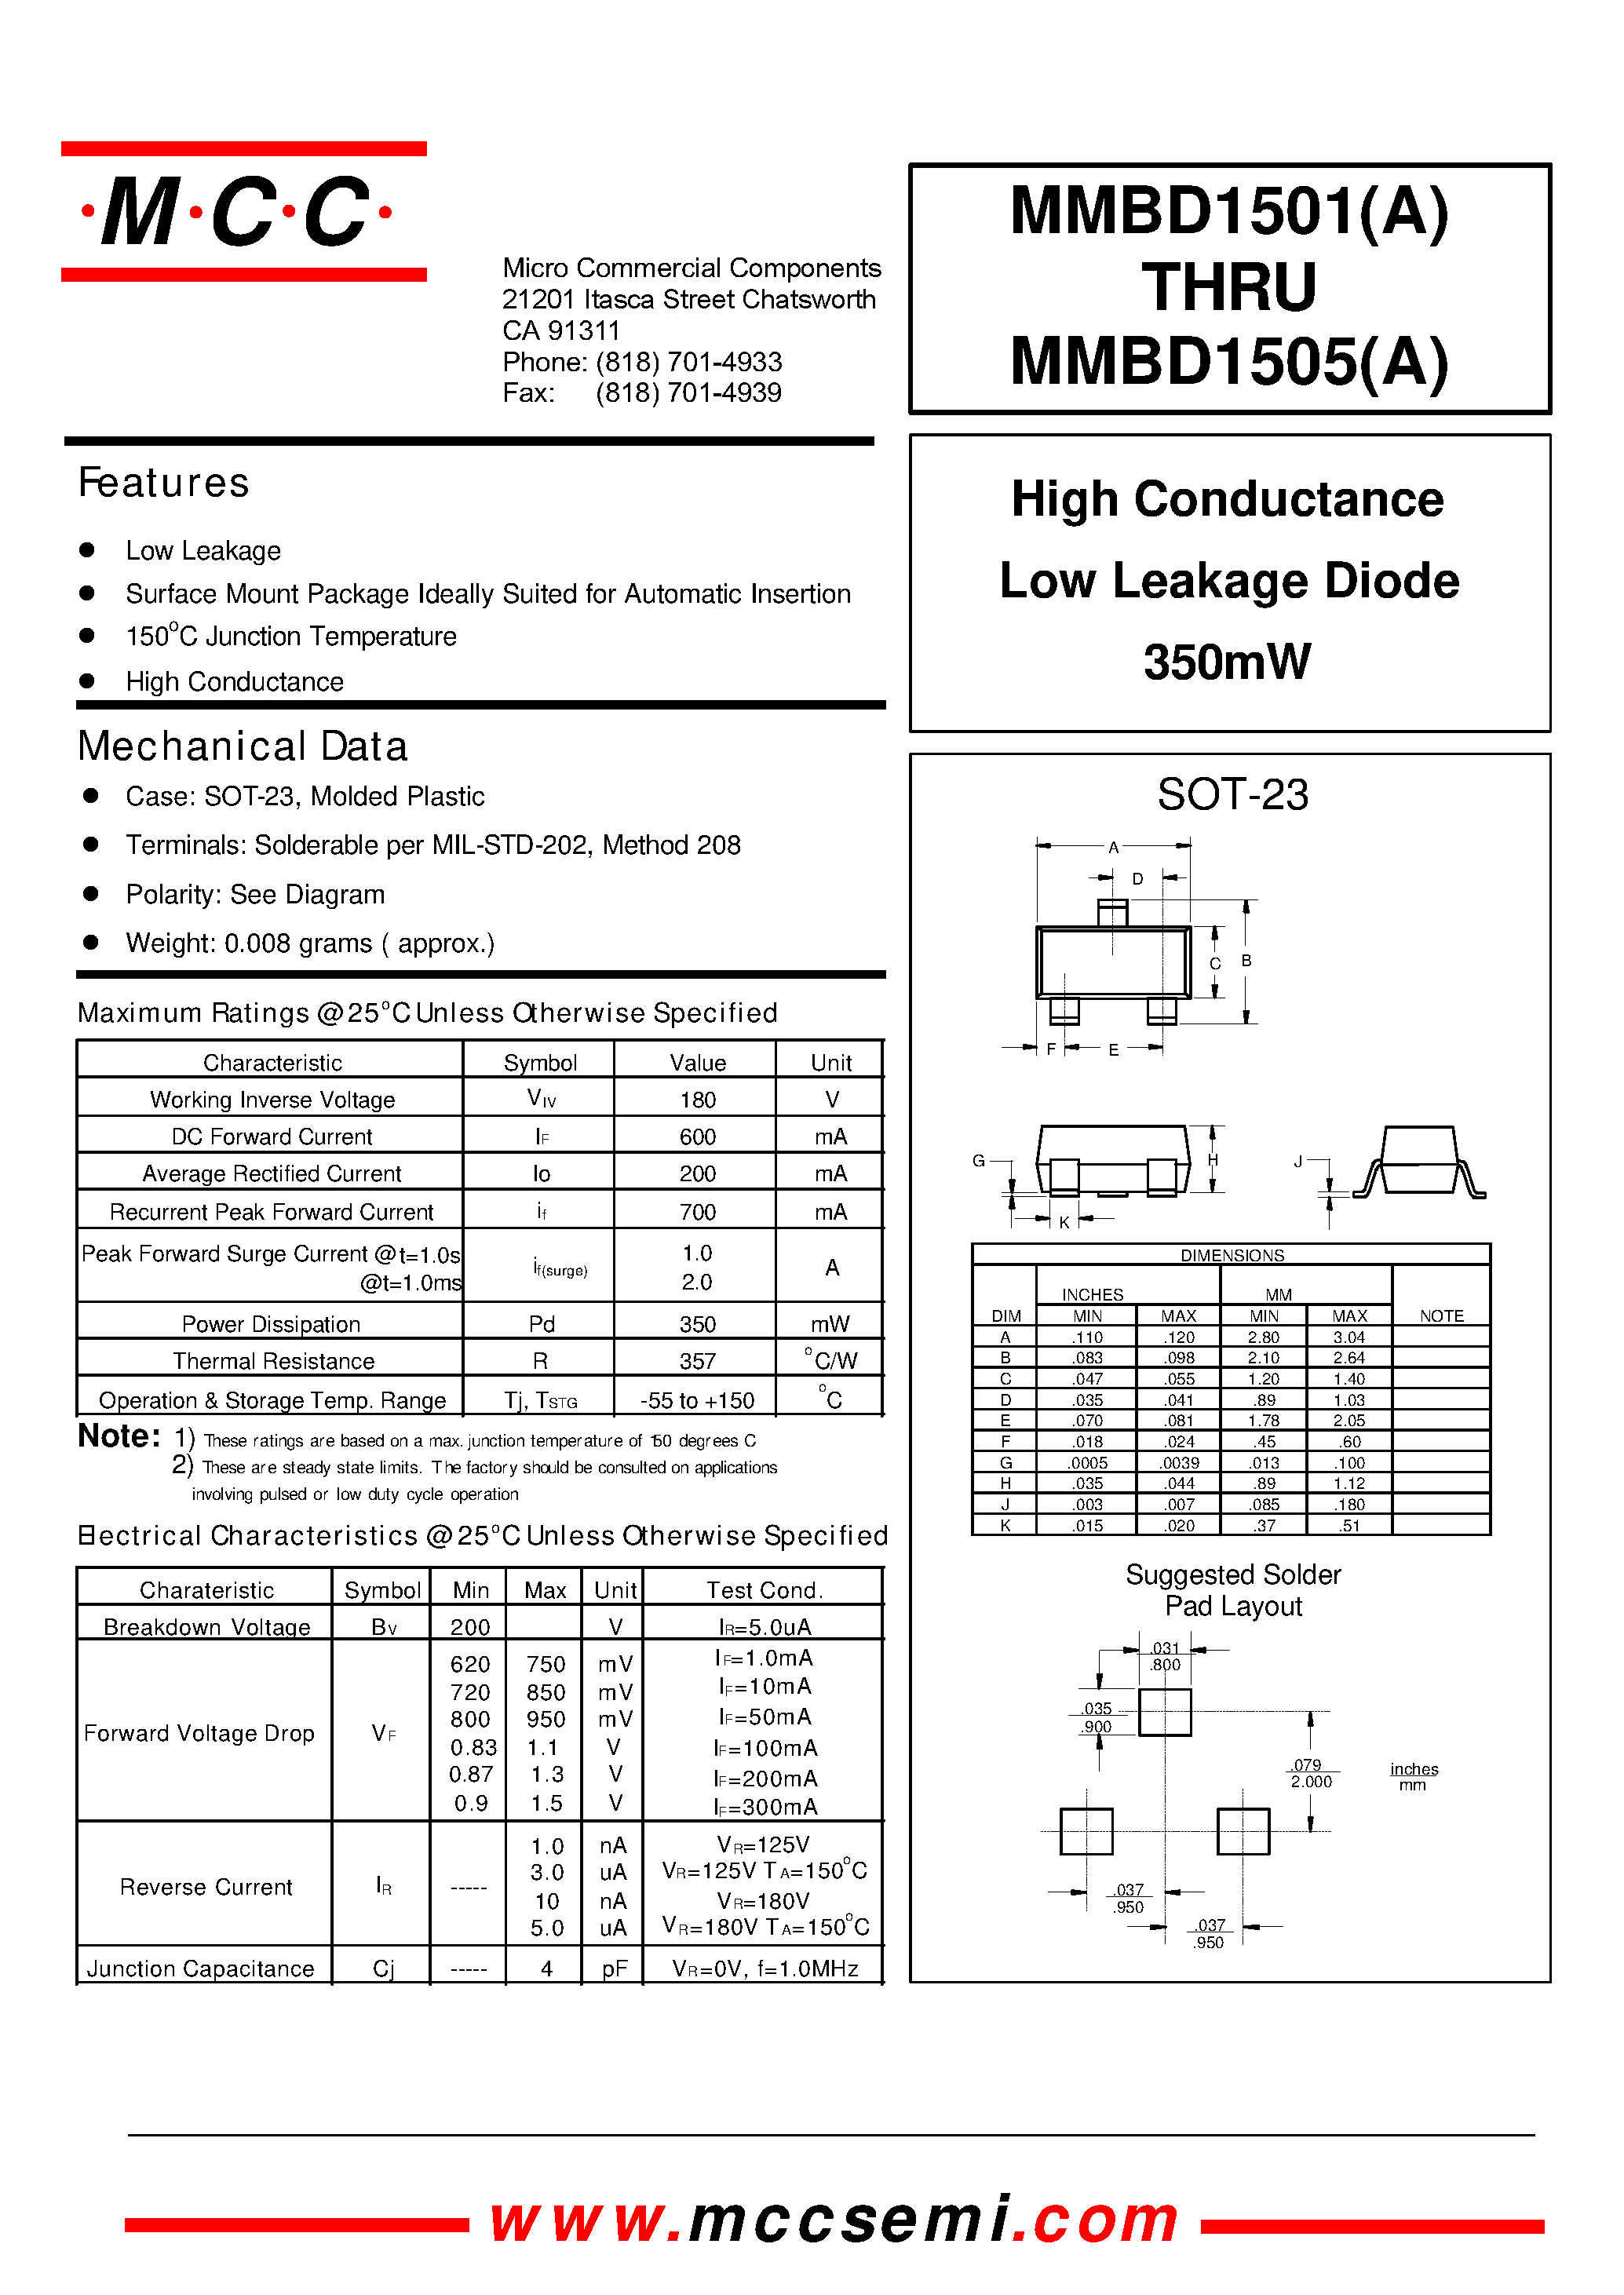 Datasheet MMBD1503A - High Conductance Low Leakage Diode 350mW page 1